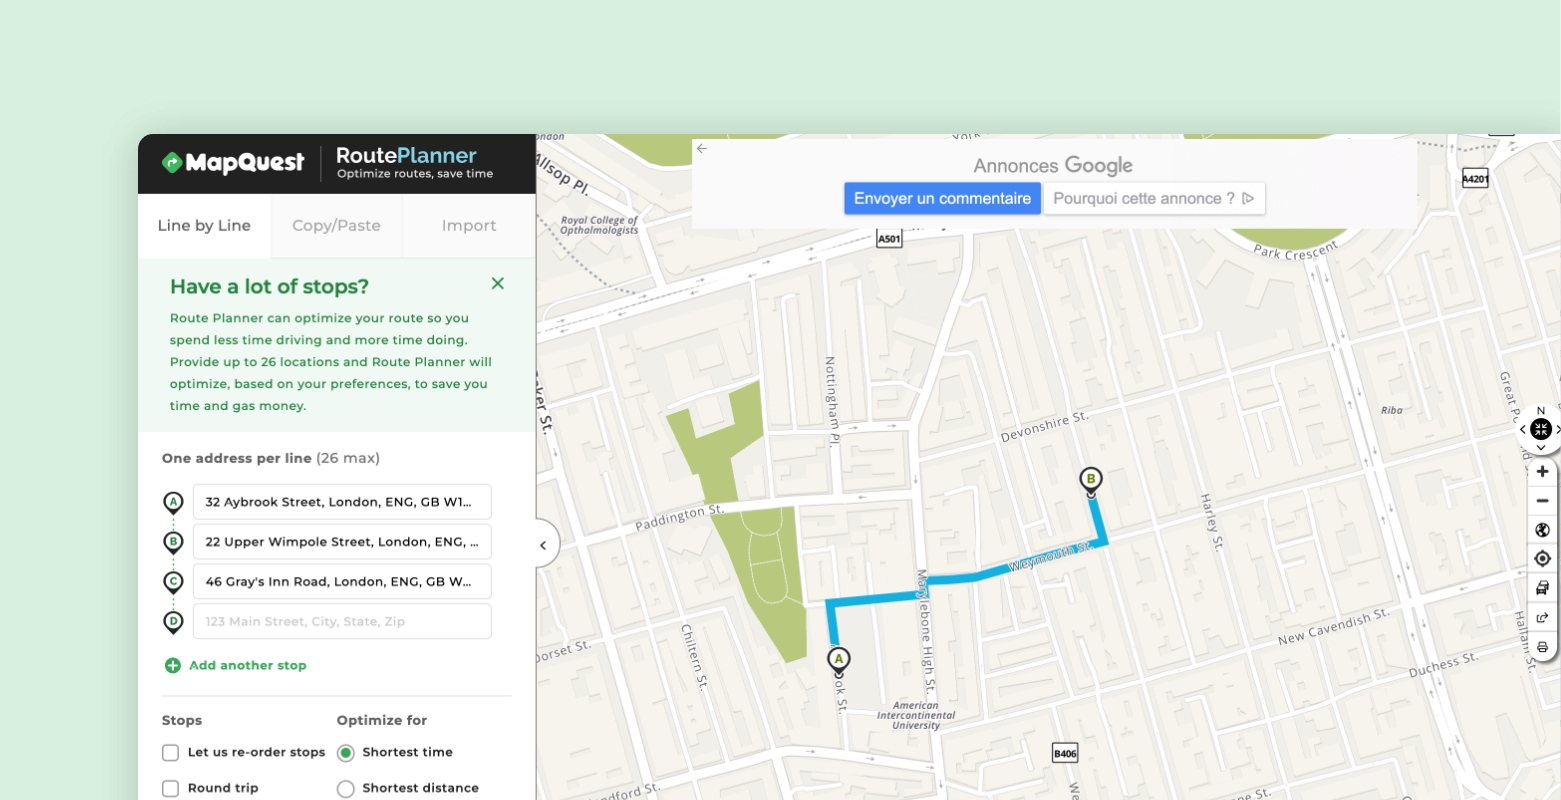 MapQuest interface